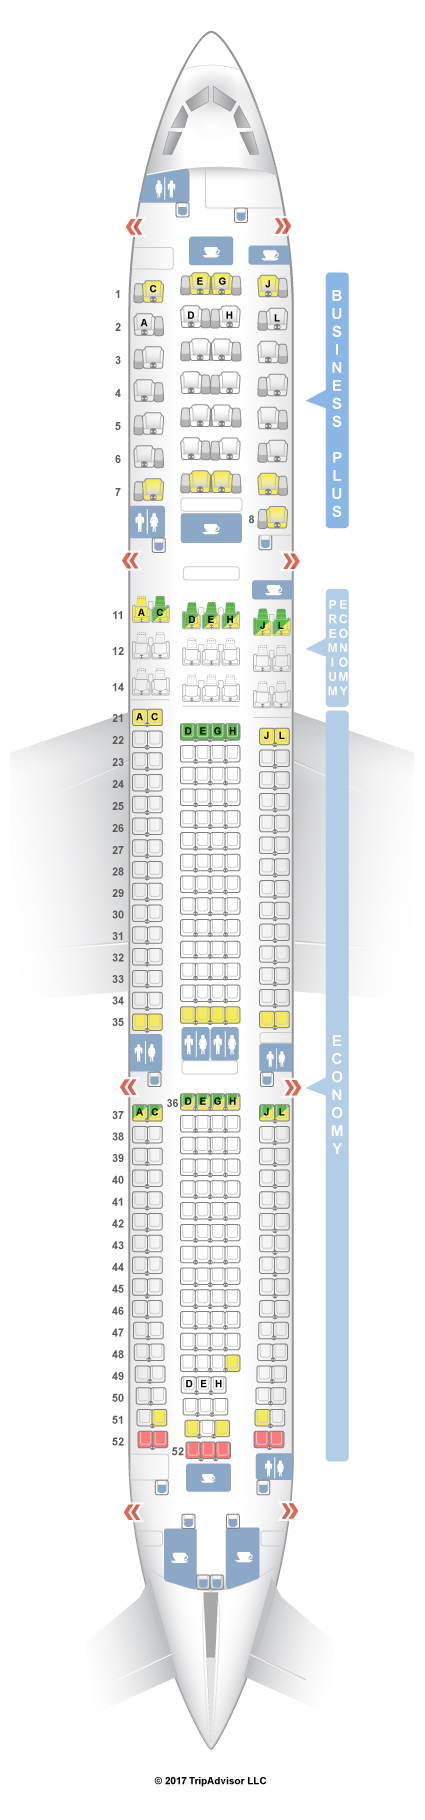 Airbus A330-300 Seat Maps, Specs & Amenities